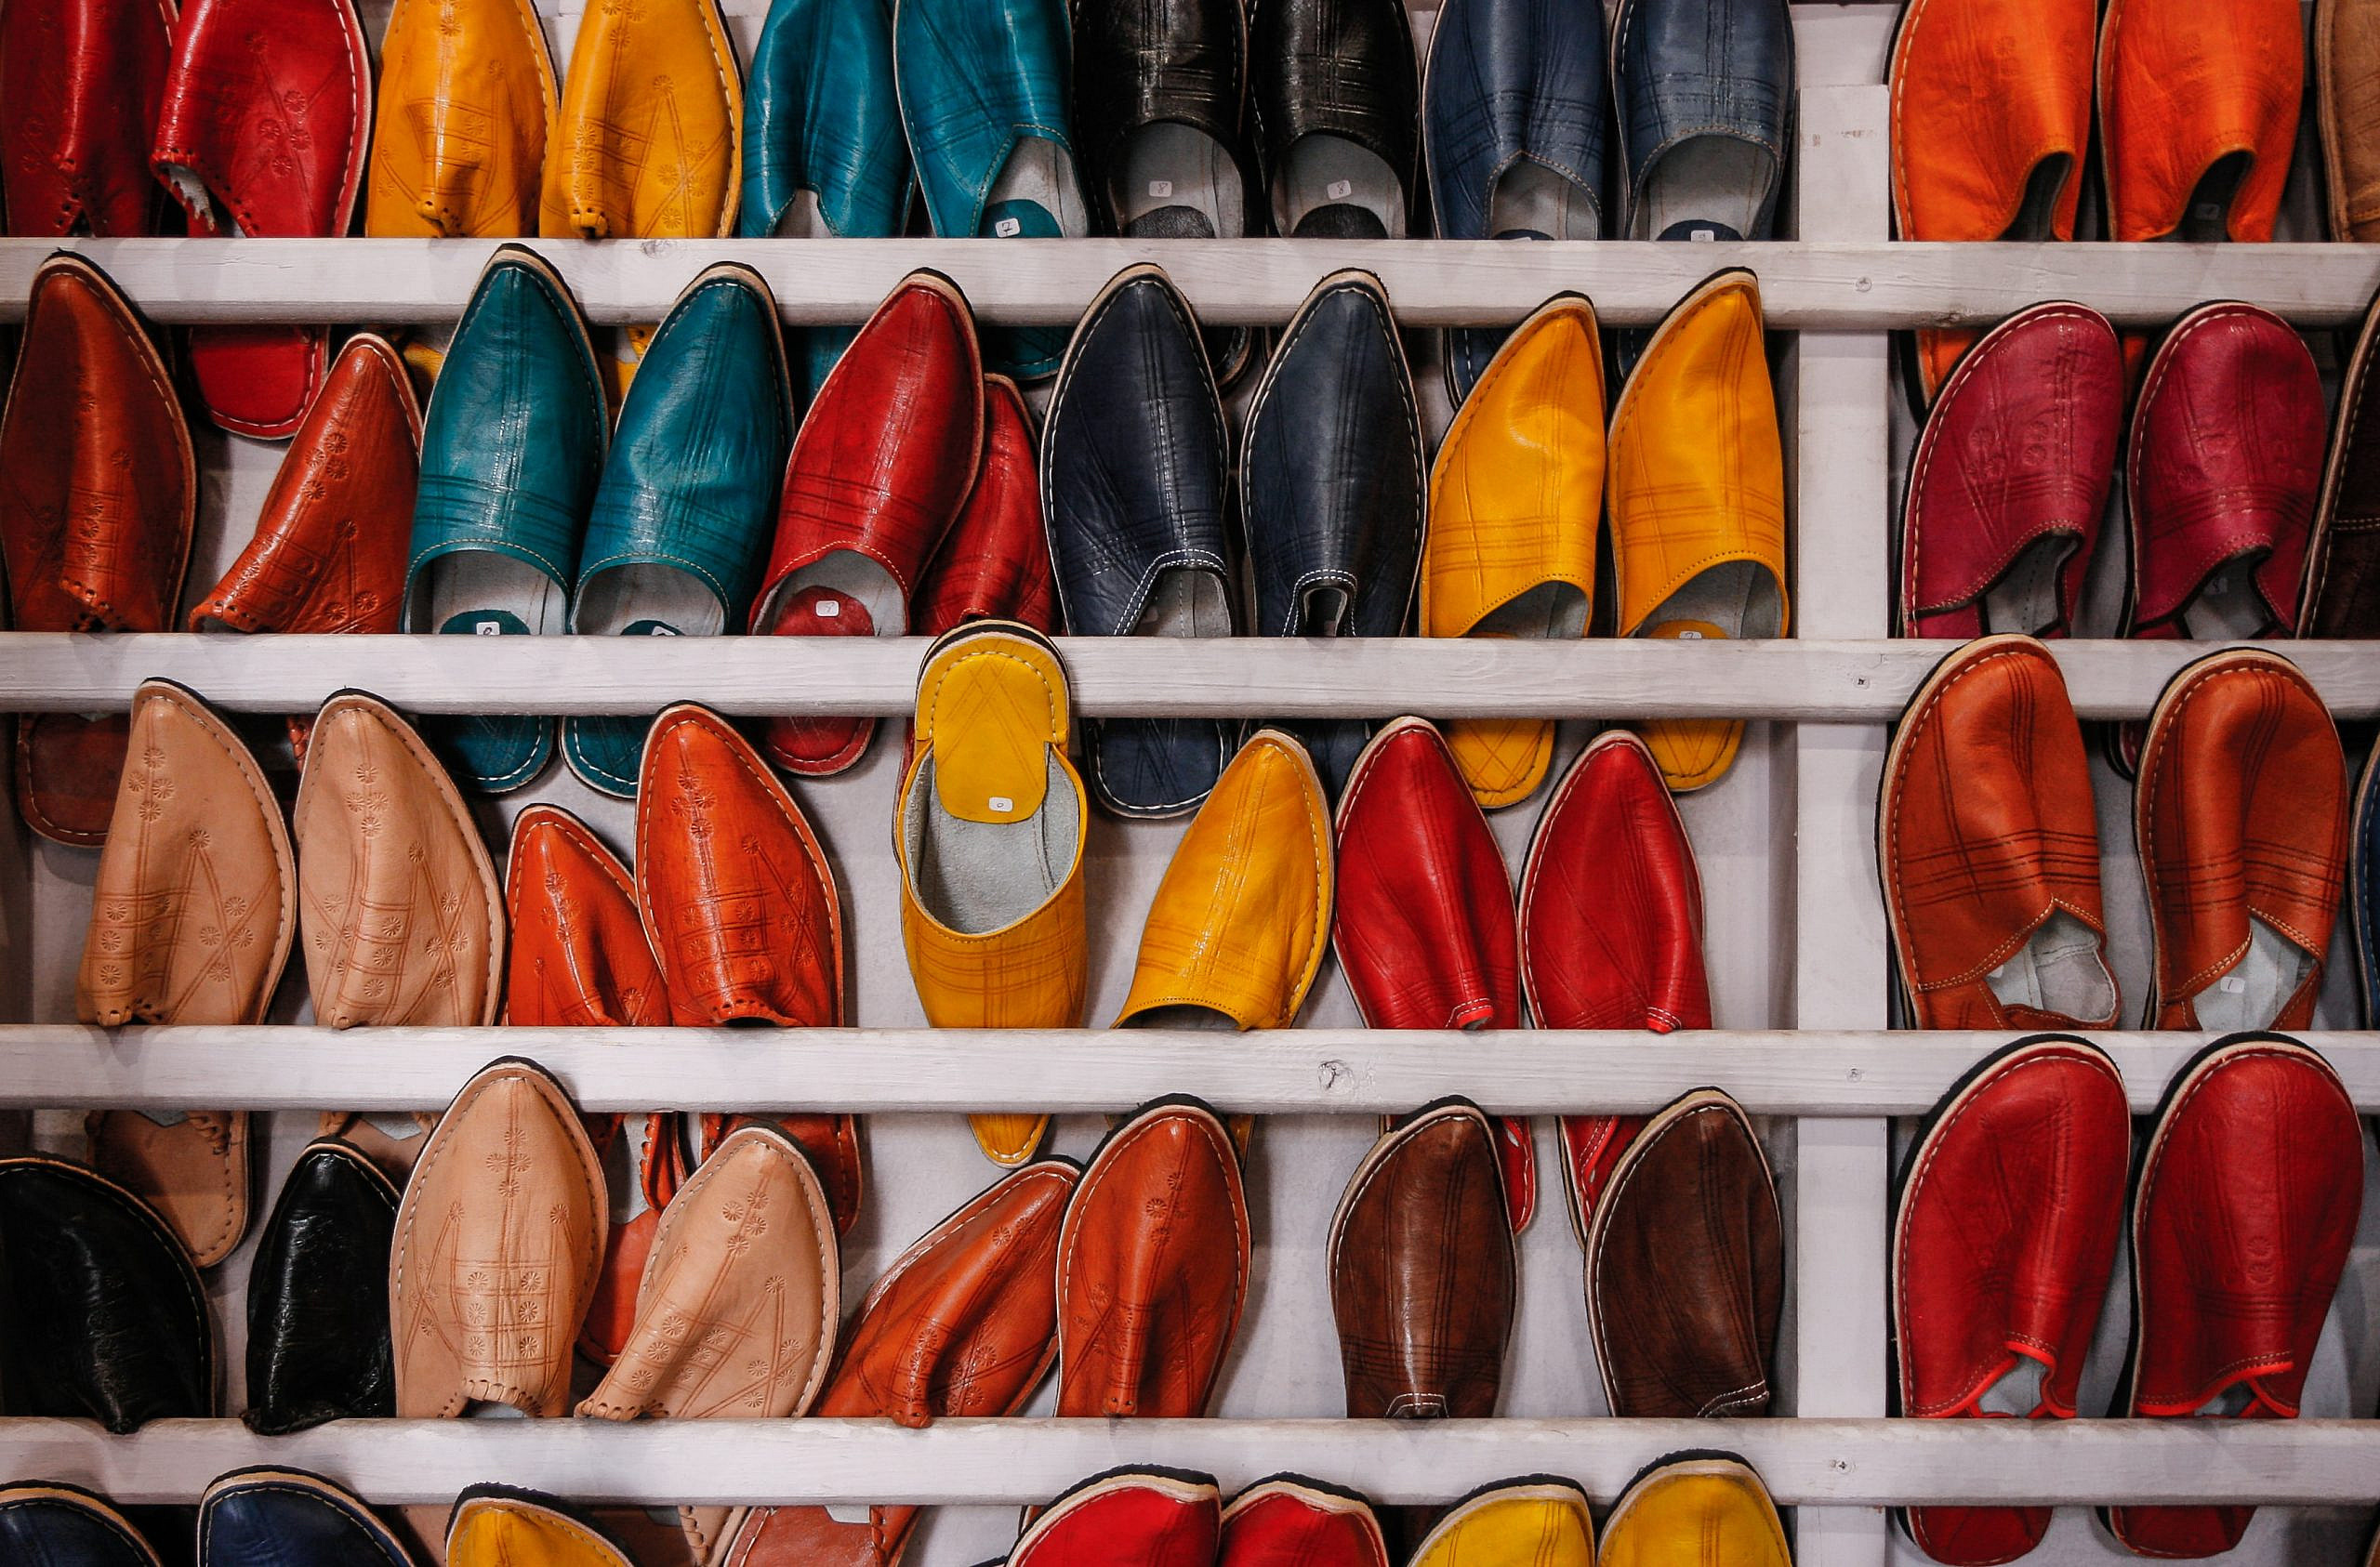 The history of leather shoes